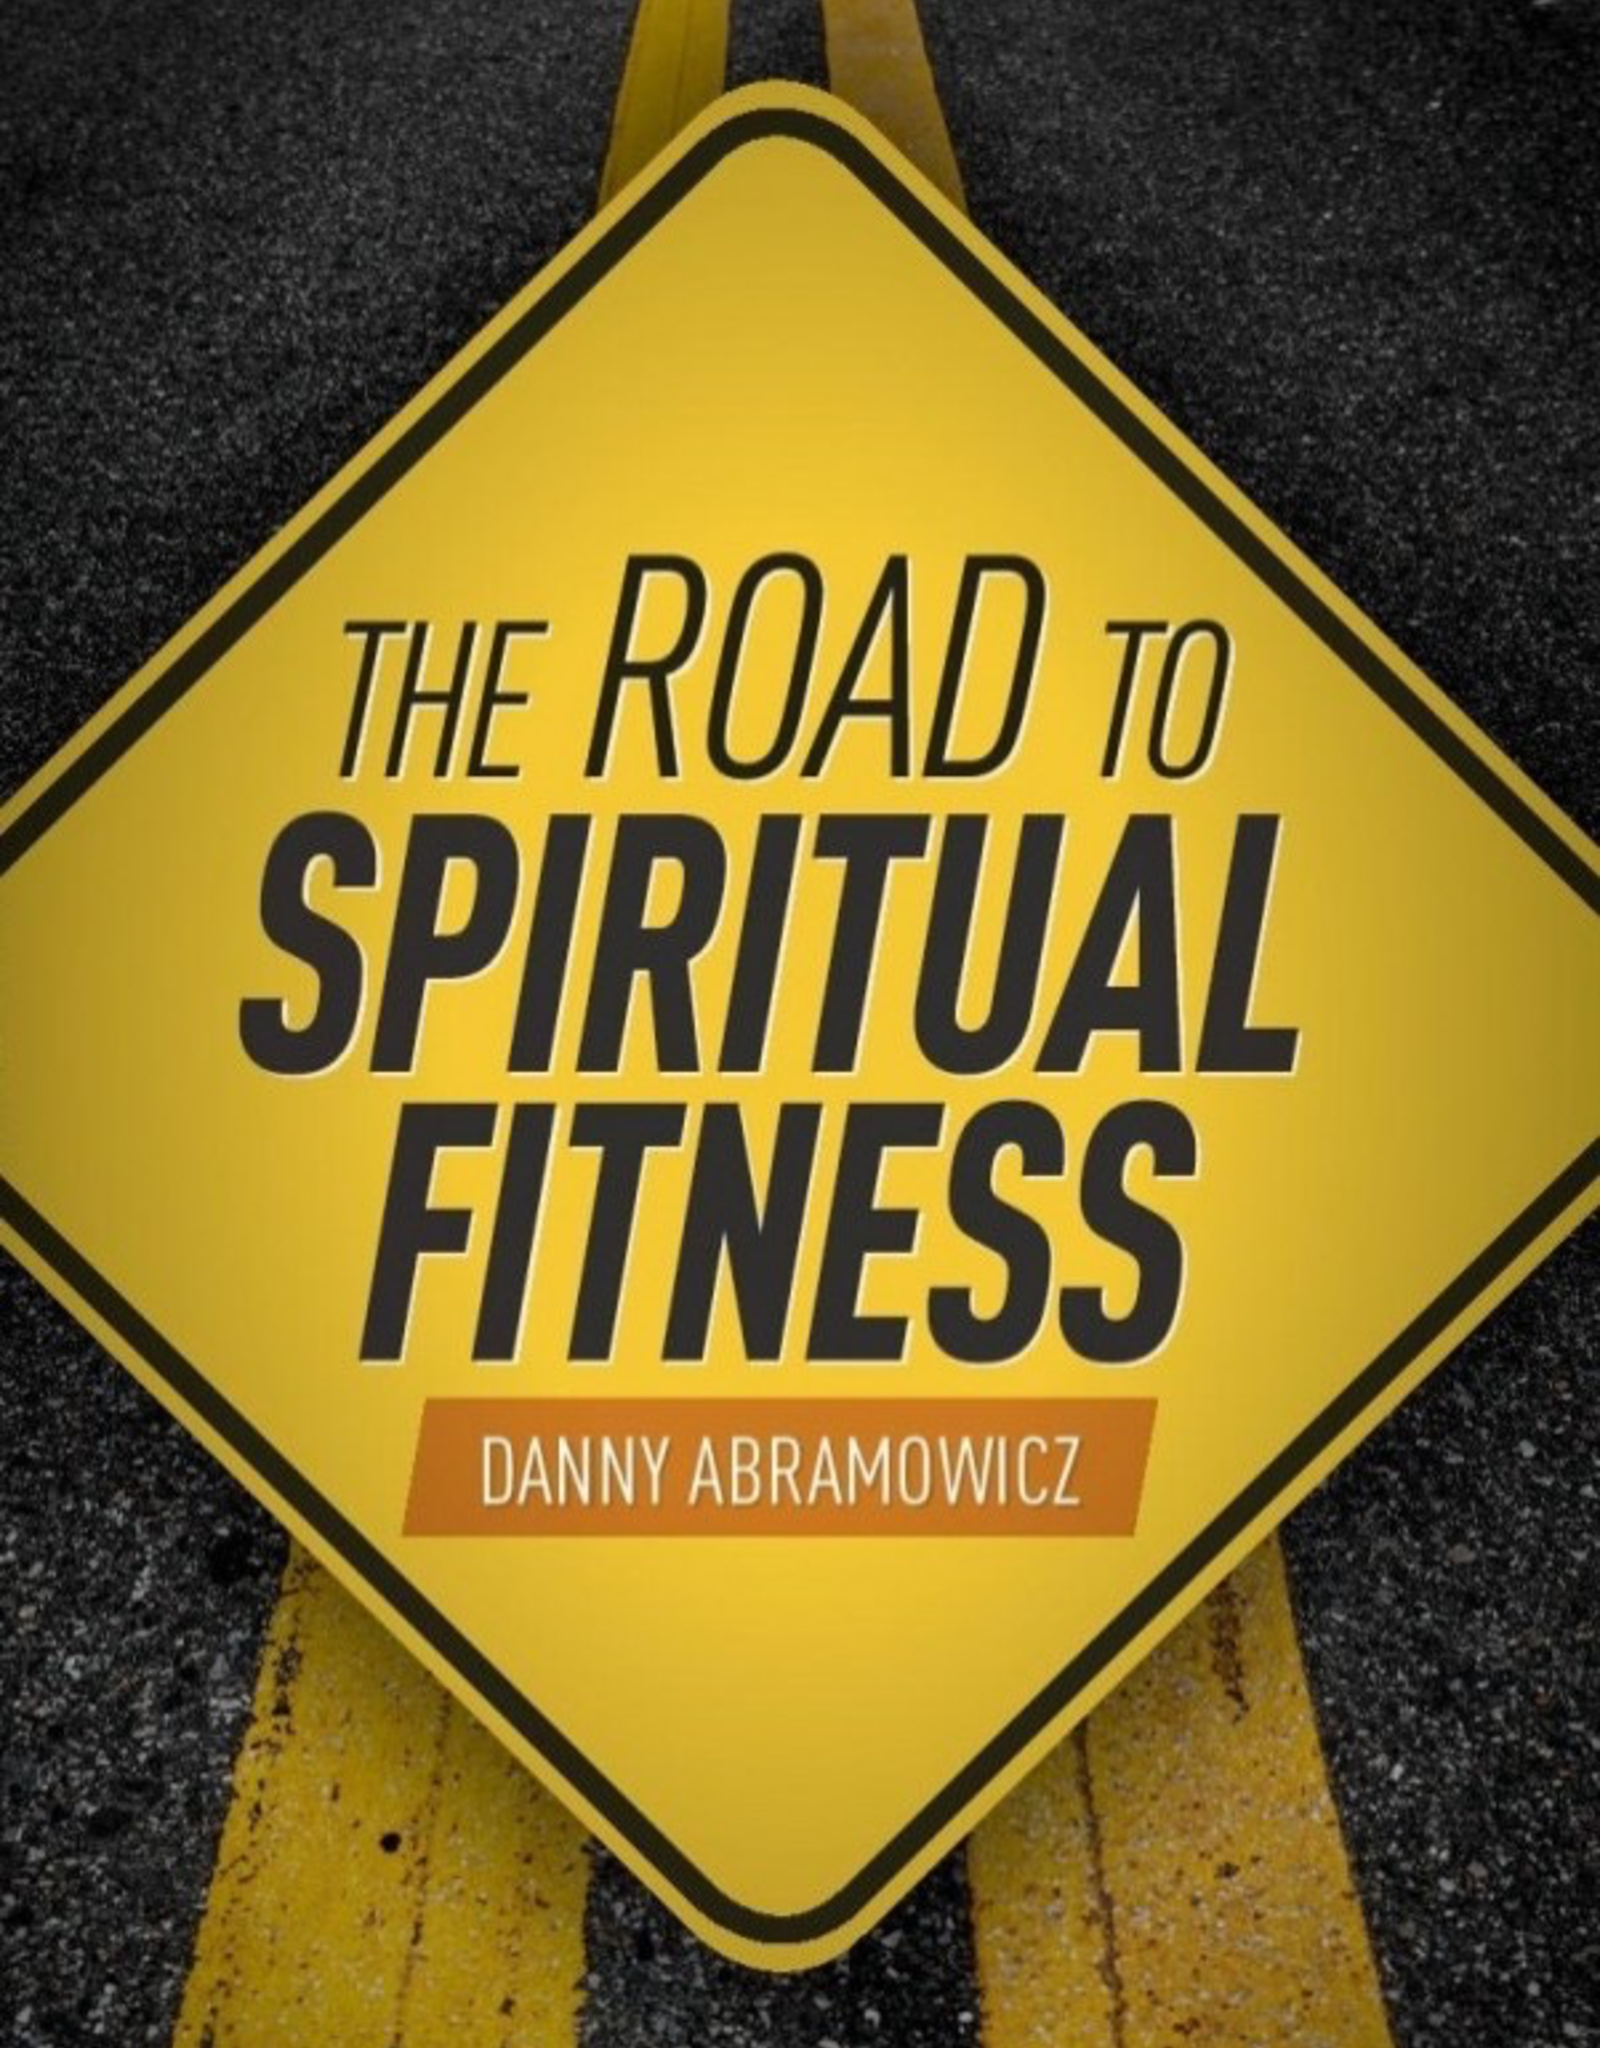 Sophia Institute The Road to Spiritual Fitness:  A Five-Step Plan for Men, by Danny Abramowicz (paperback)